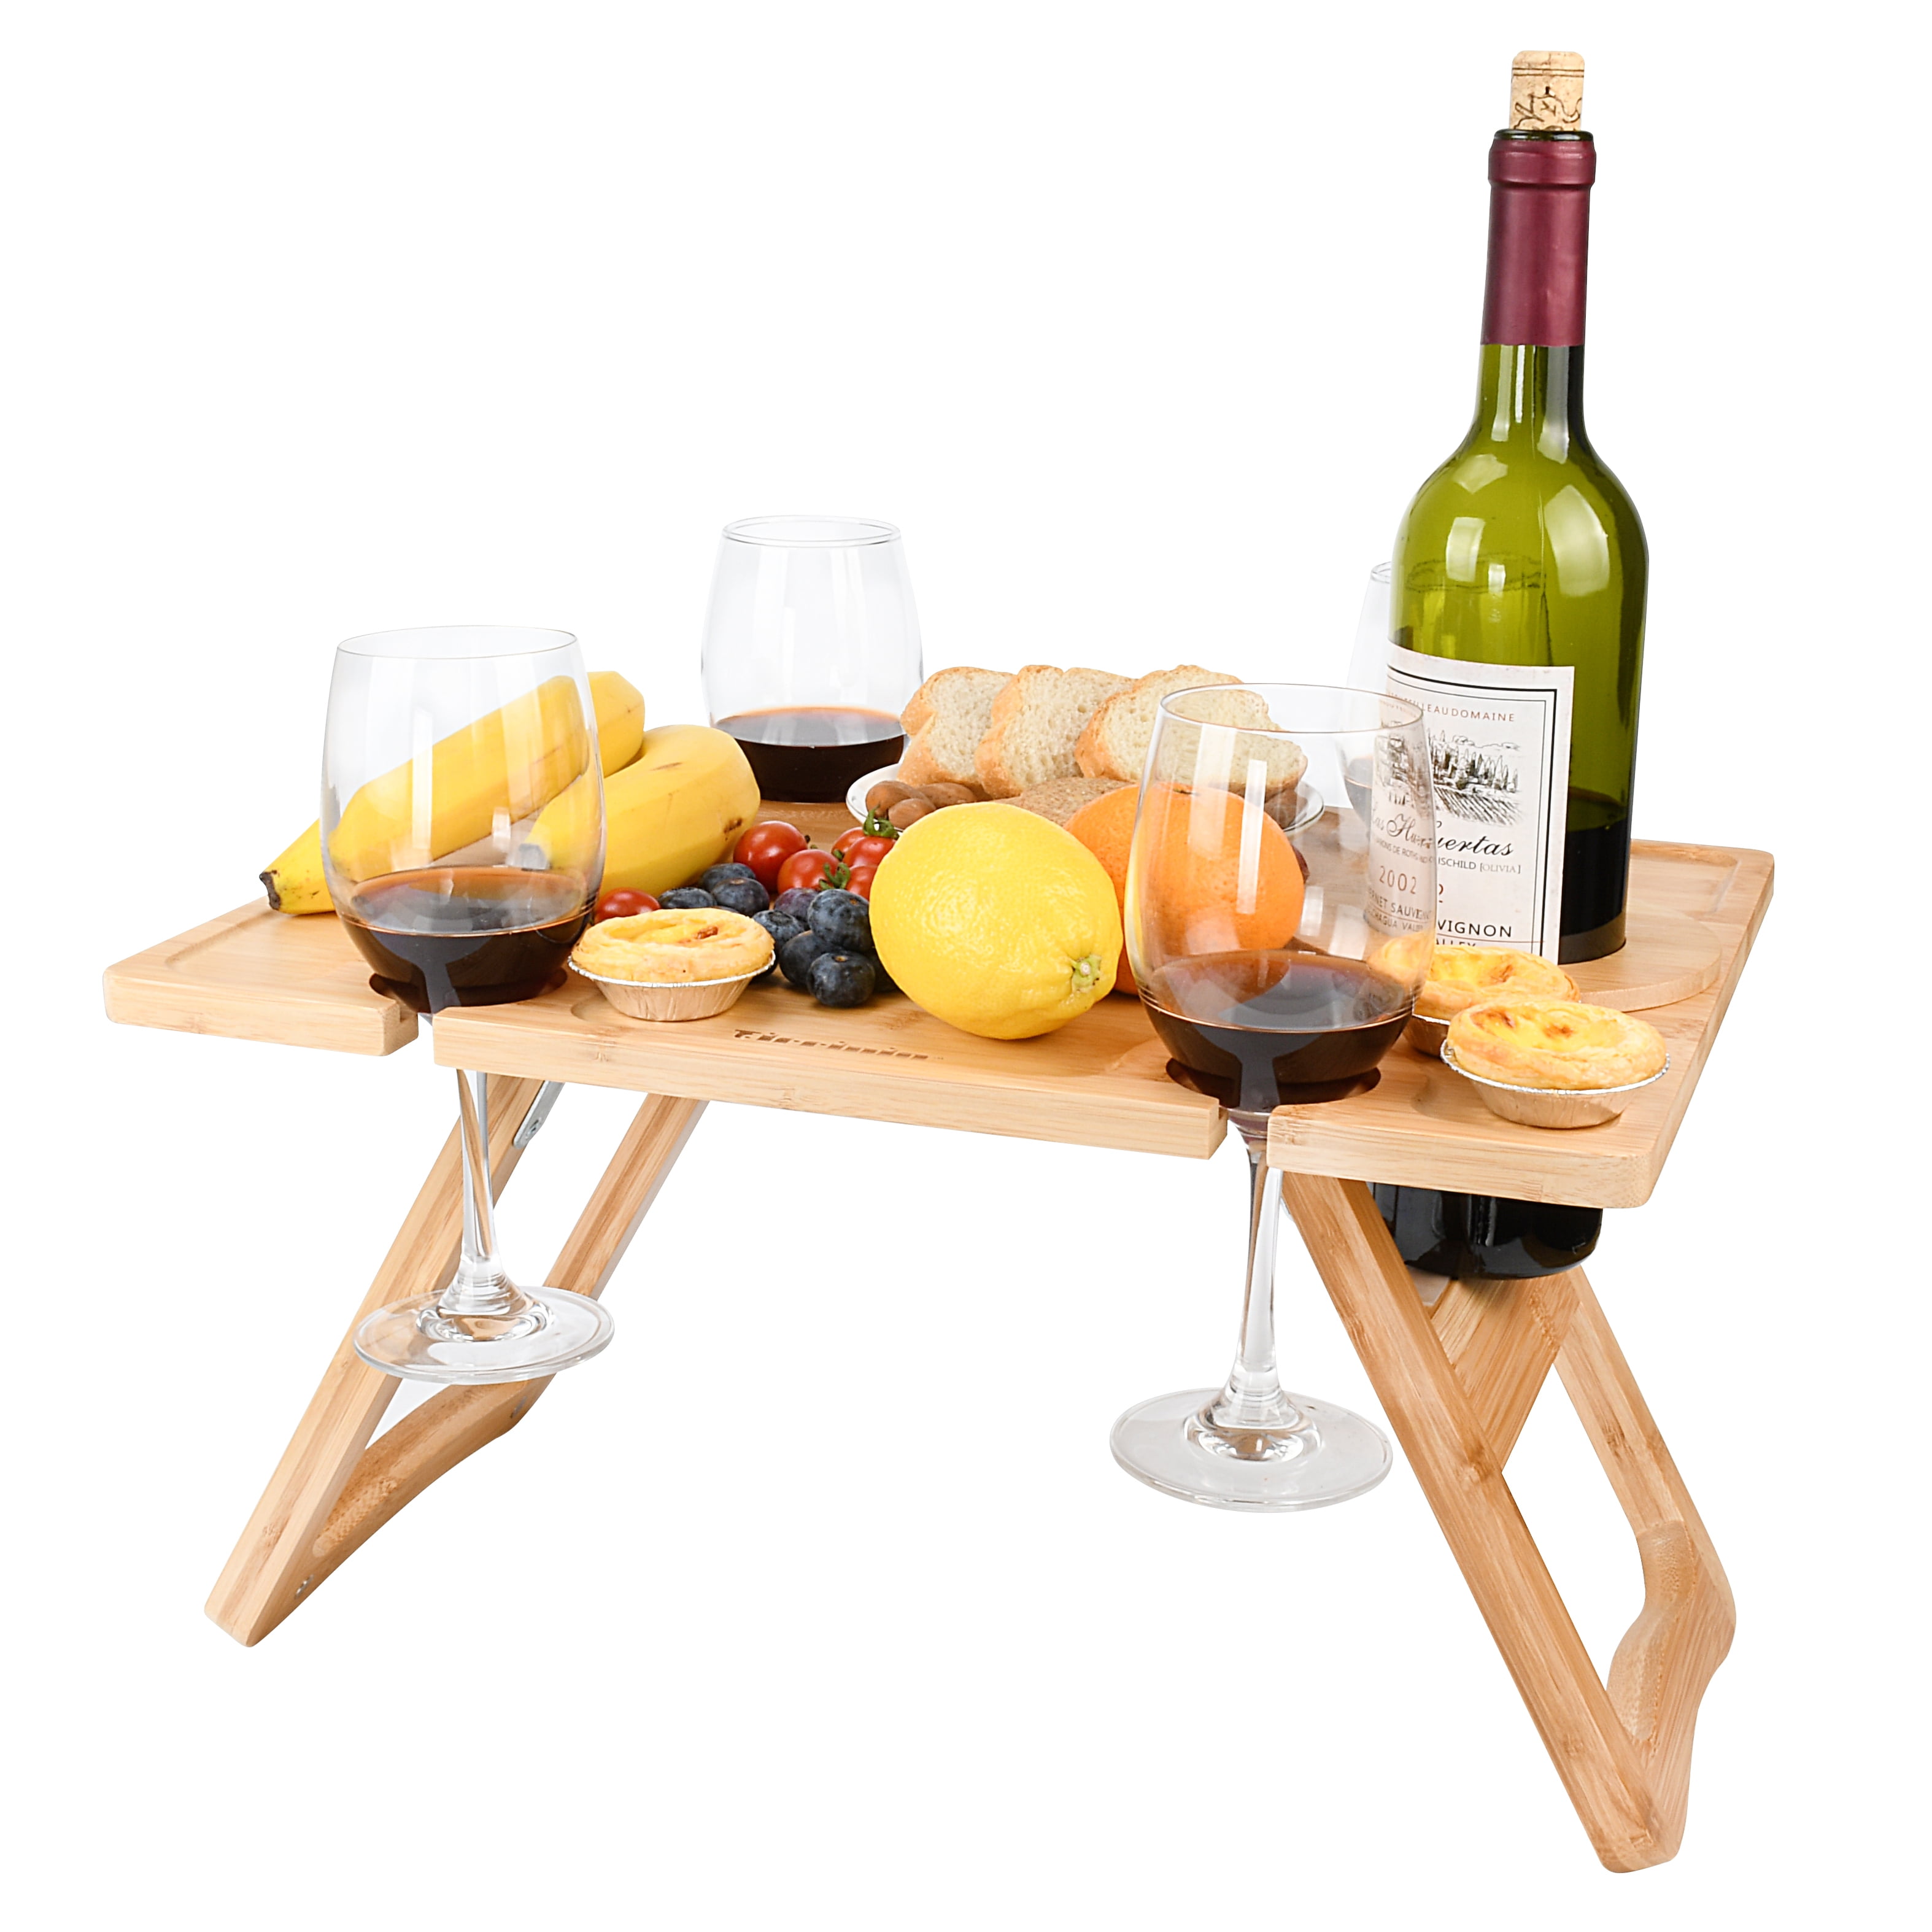 Wine Bottles and Dishes Black junshi11 Outdoor Folding Wine Table Wine Table Detachable Easy to Install Wood Pointed Stake Foldable Wine Rack for Putting Wine Glasses 